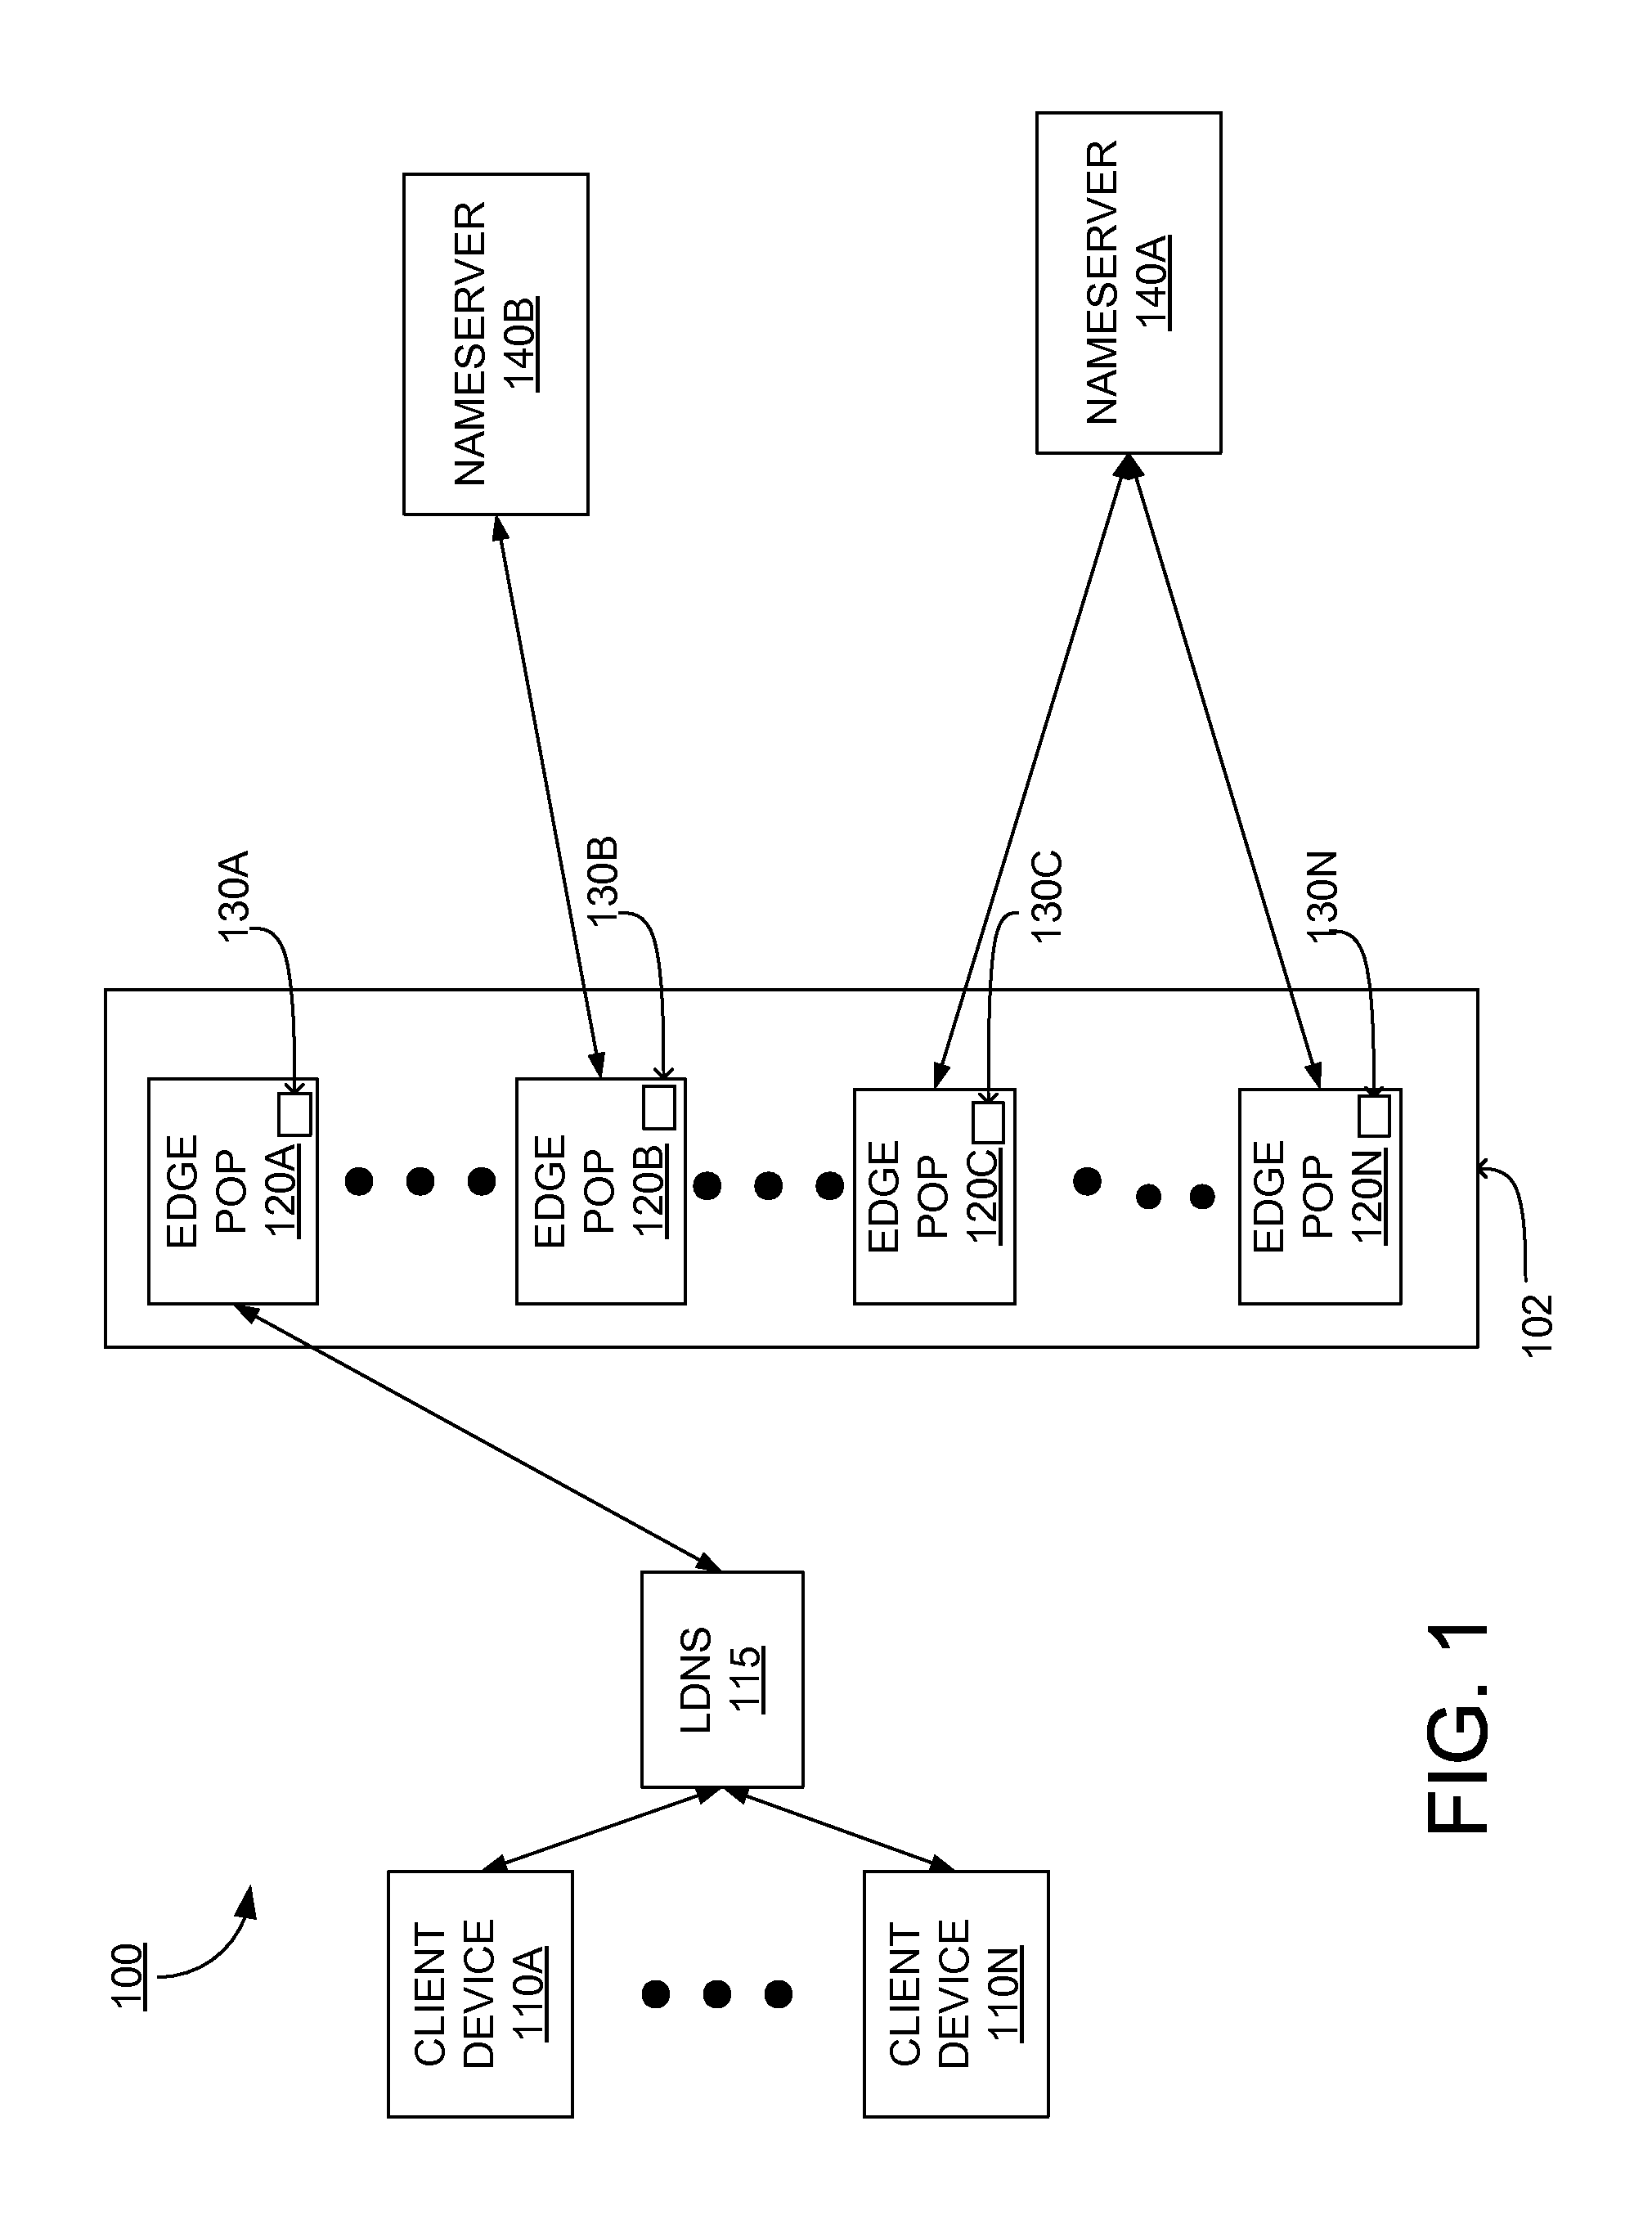 Cname-based round-trip time measurement in a content delivery network